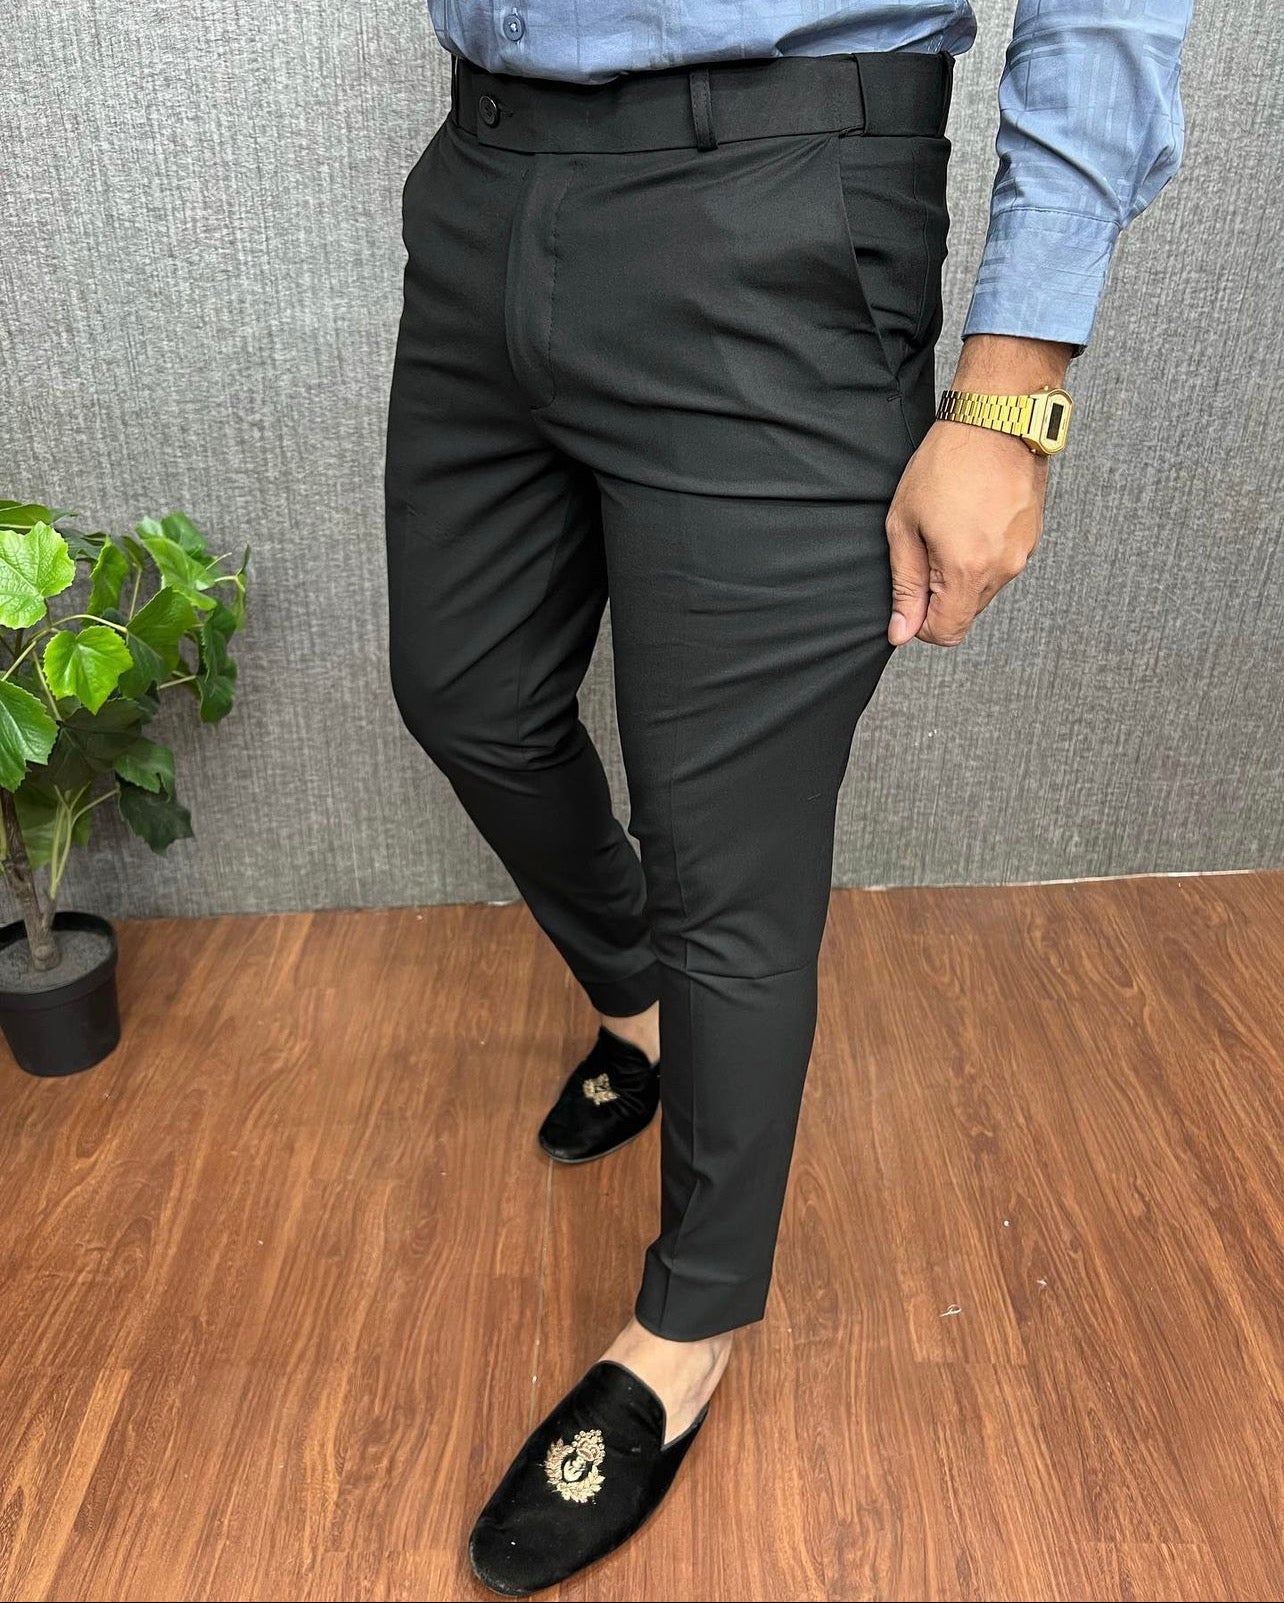 Spring Summer Suit Pants Men Stretch Business Elastic Waist Slim Ankle  Length Pant Korean Thin Trousers Male Large Size 40 42 Size: 38, Color:  Khaki-Ankle | Uquid shopping cart: Online shopping with crypto currencies